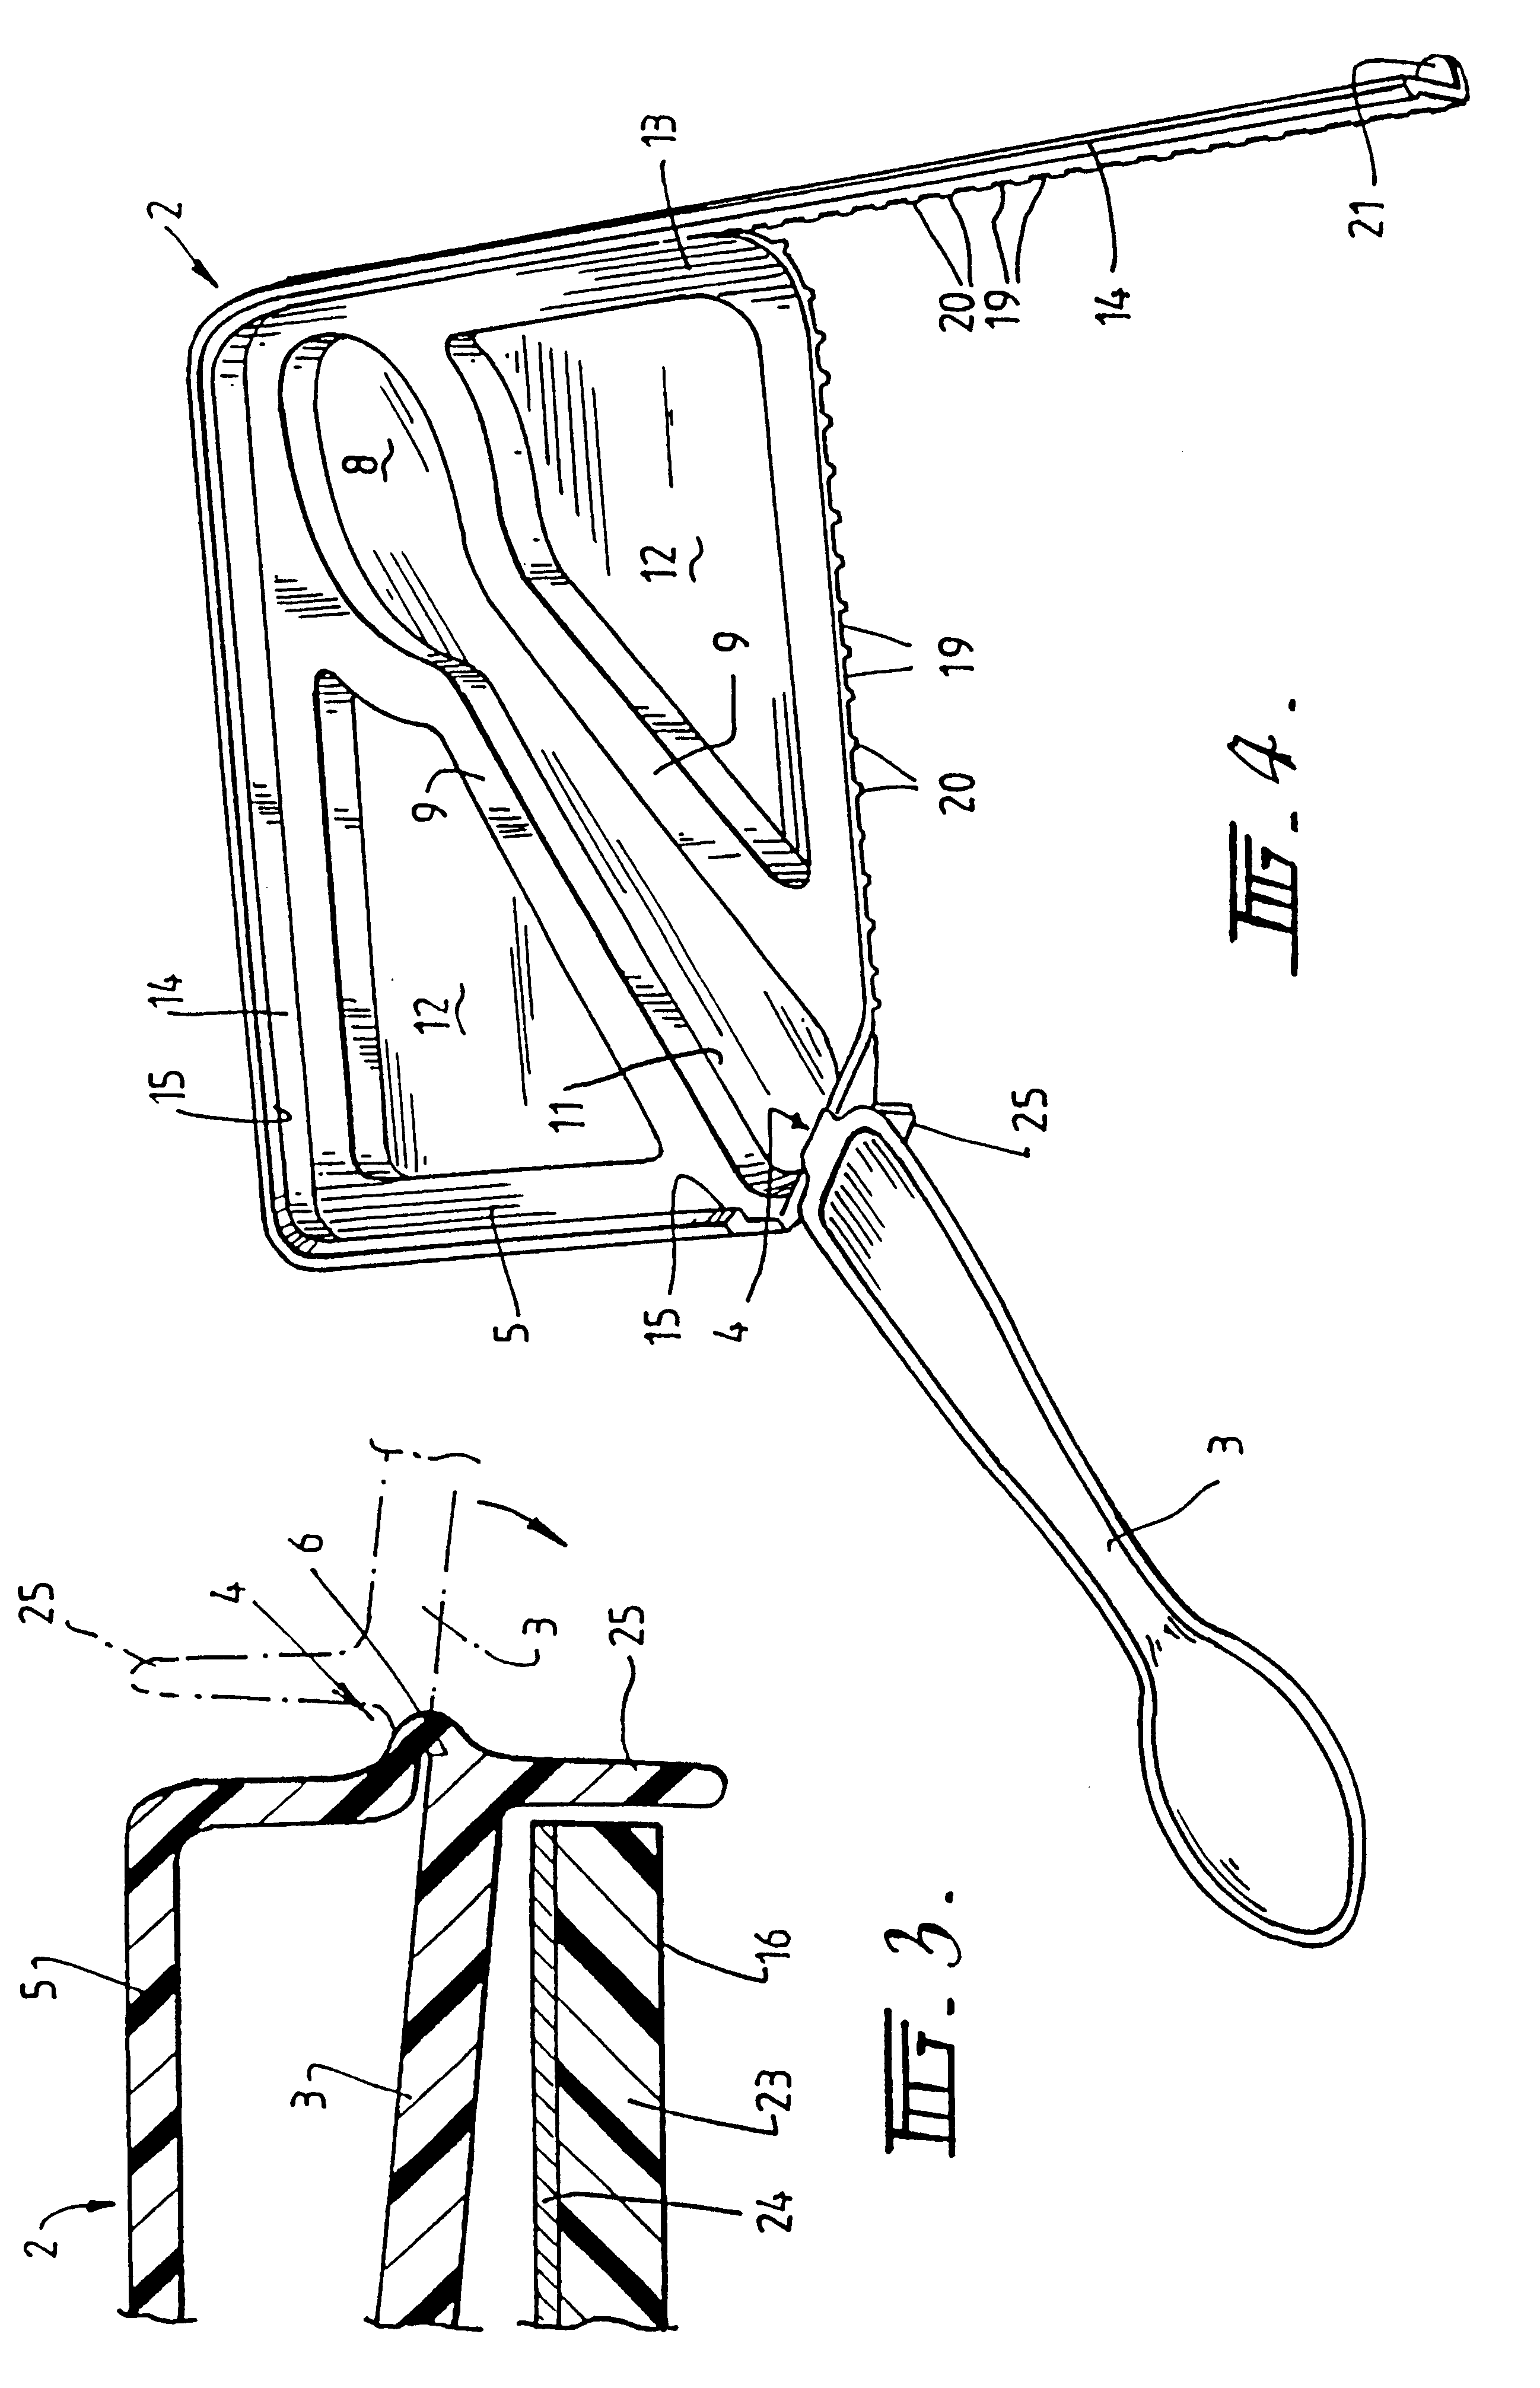 Container lid and implement